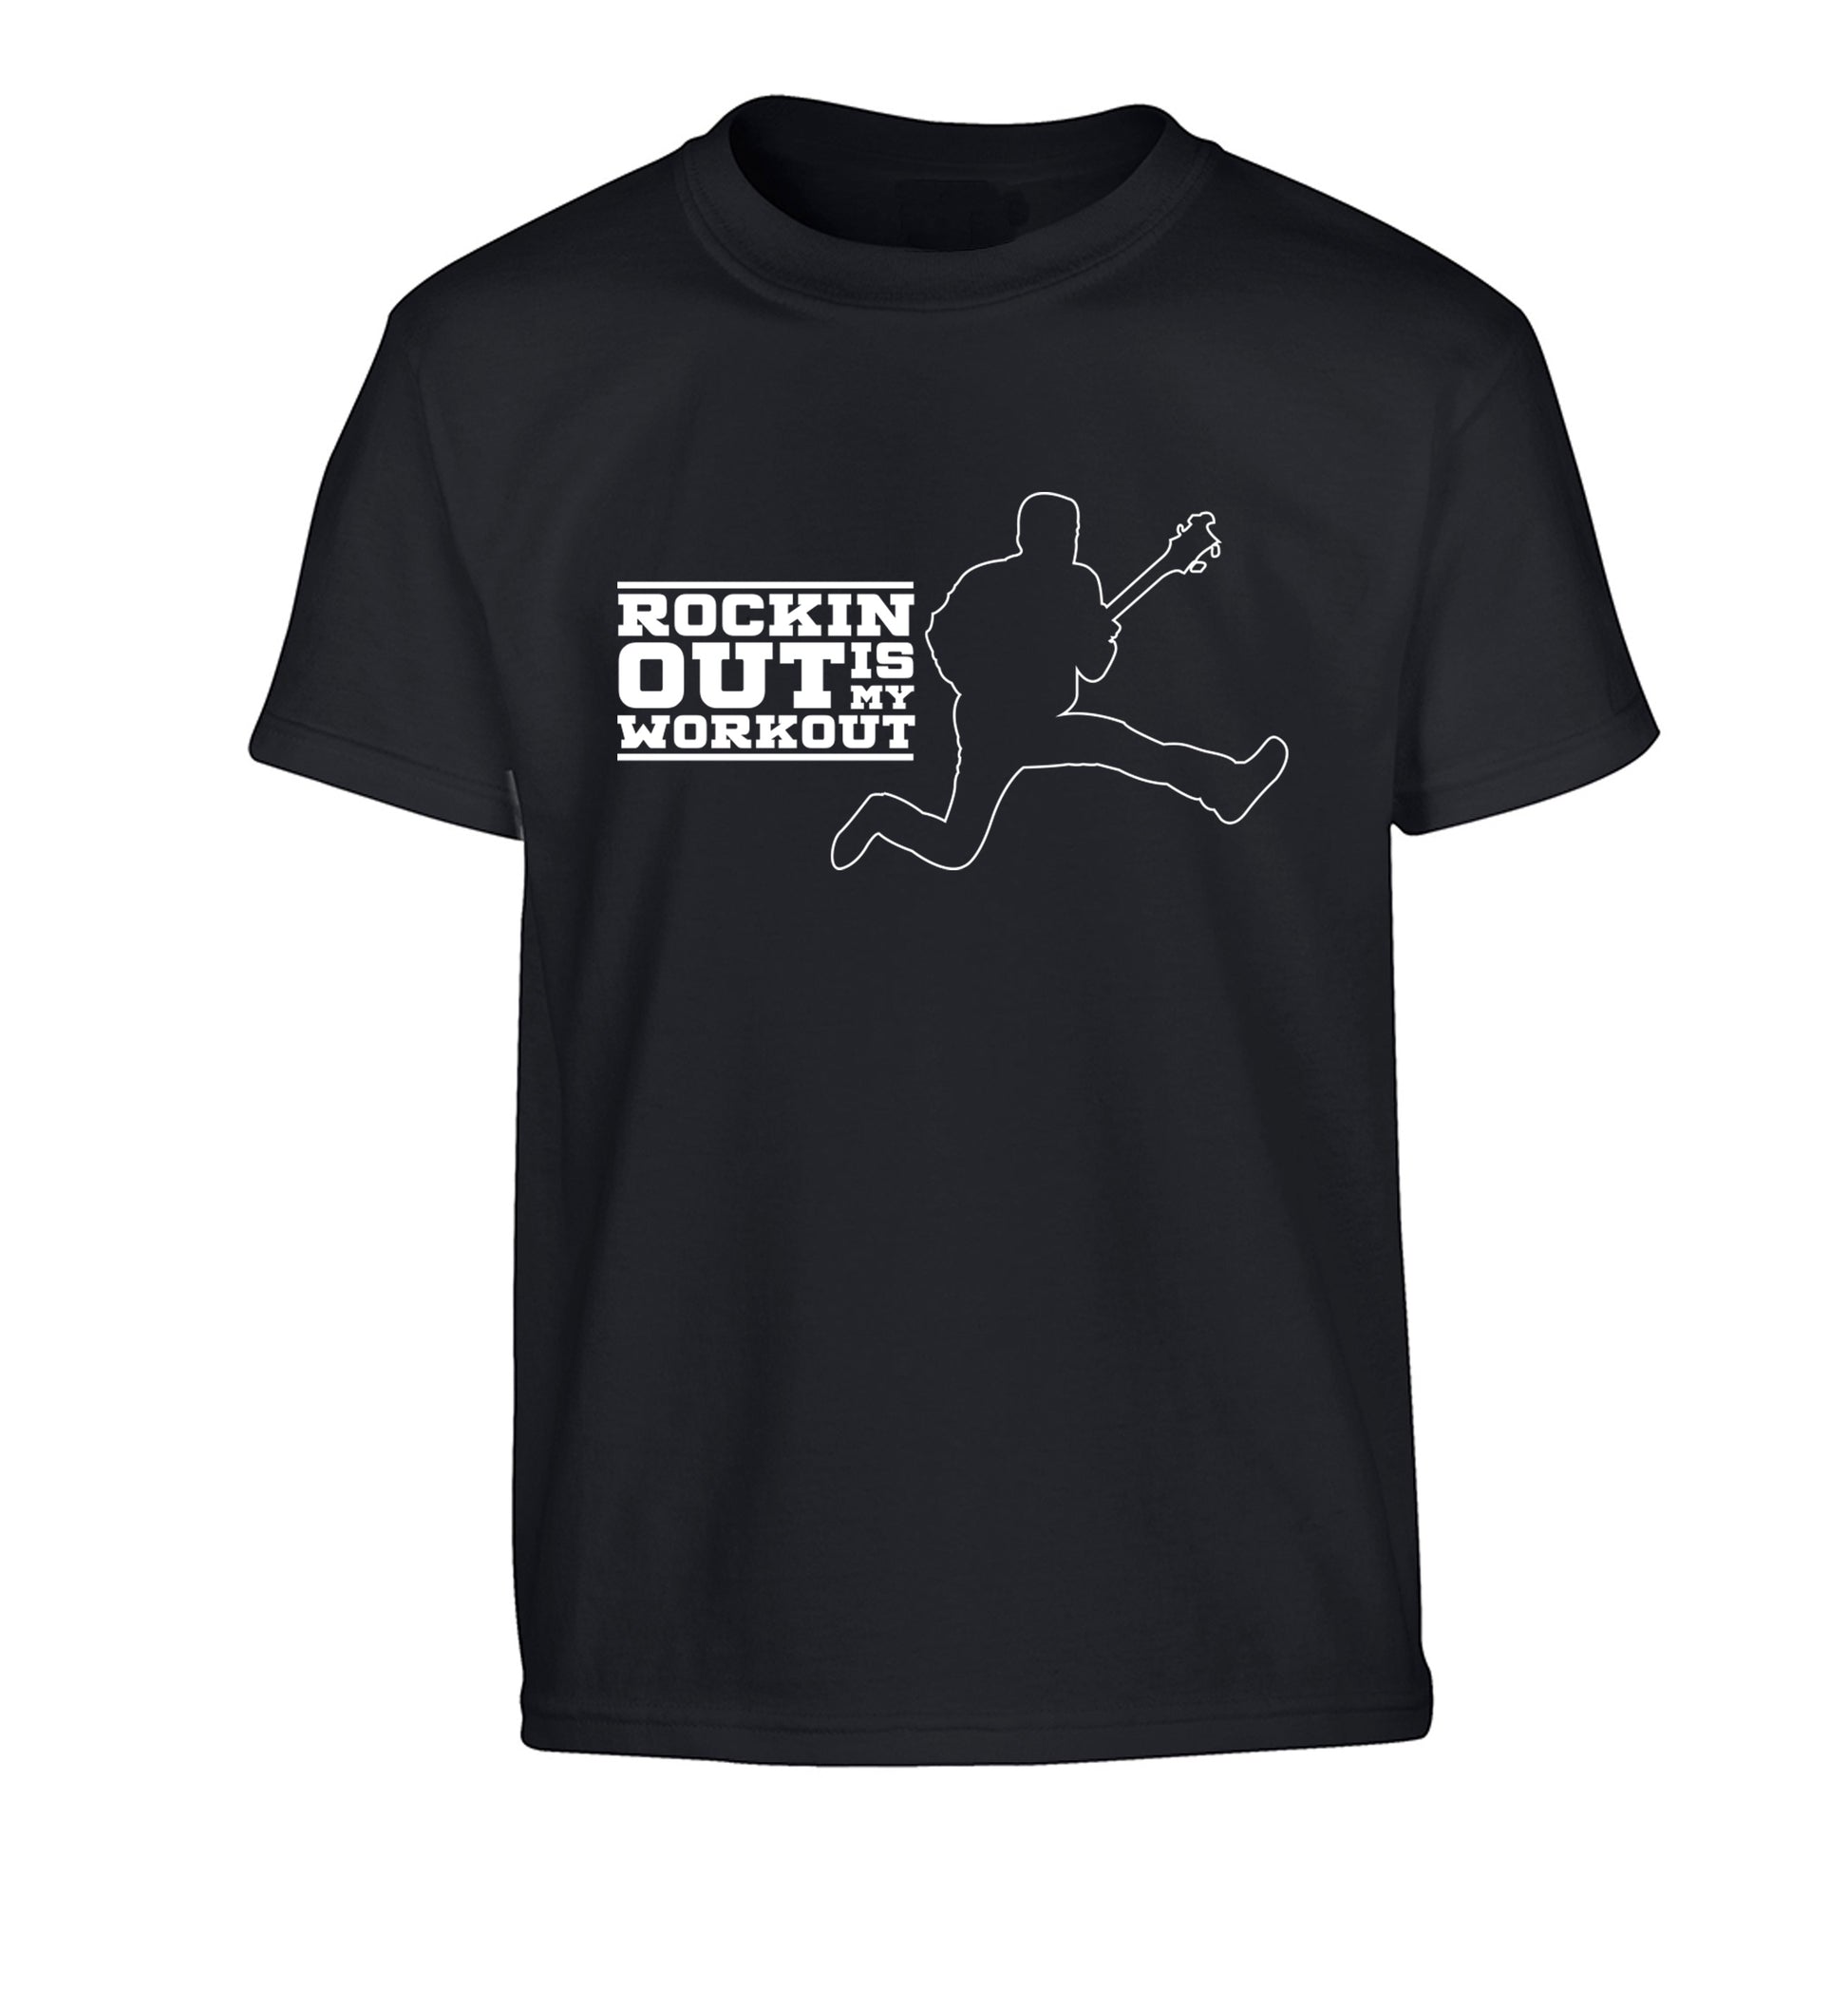 Rockin out is my workout Children's black Tshirt 12-13 Years